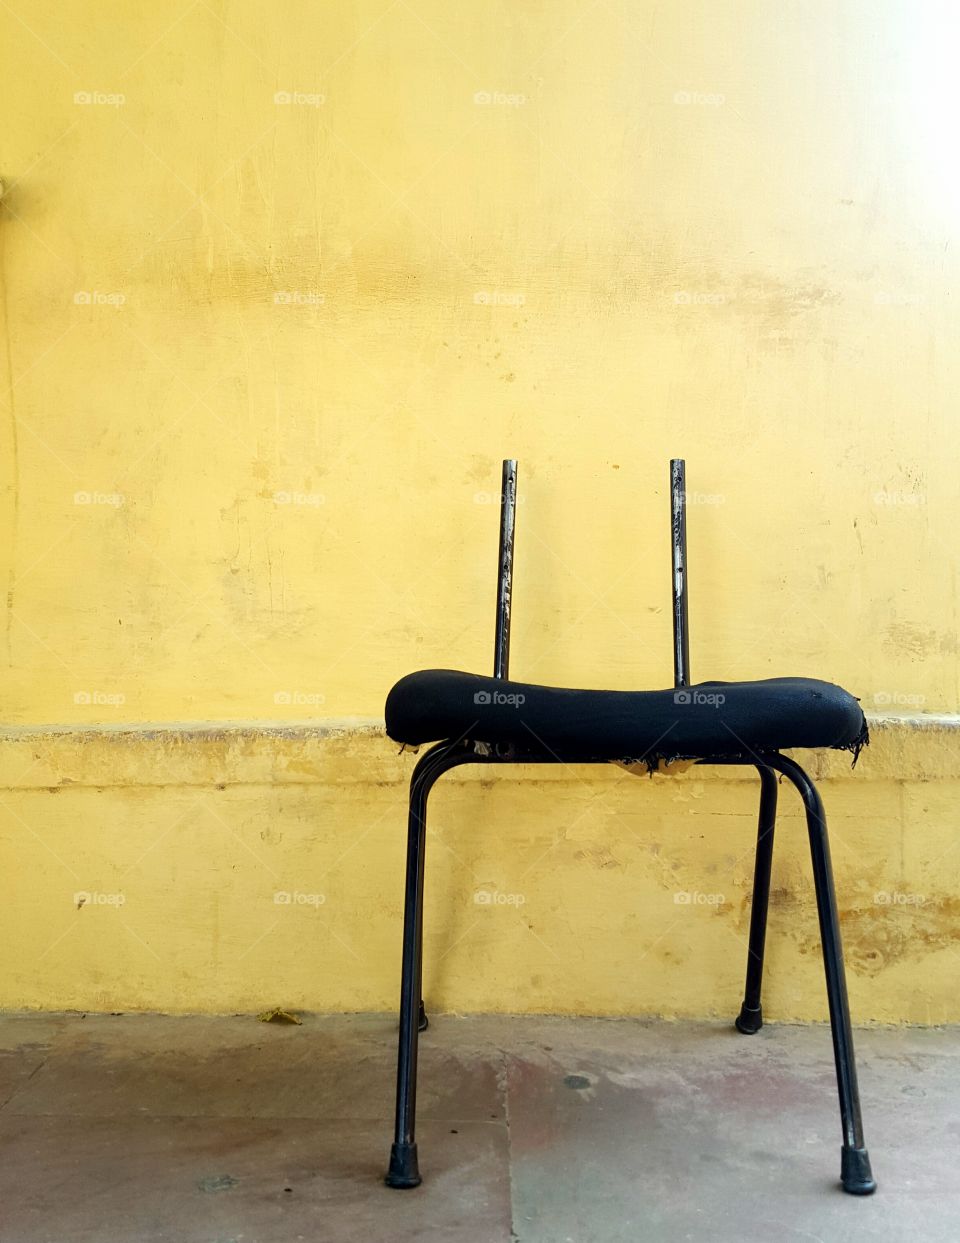 Broken Metal chair against a yellow Indian wall